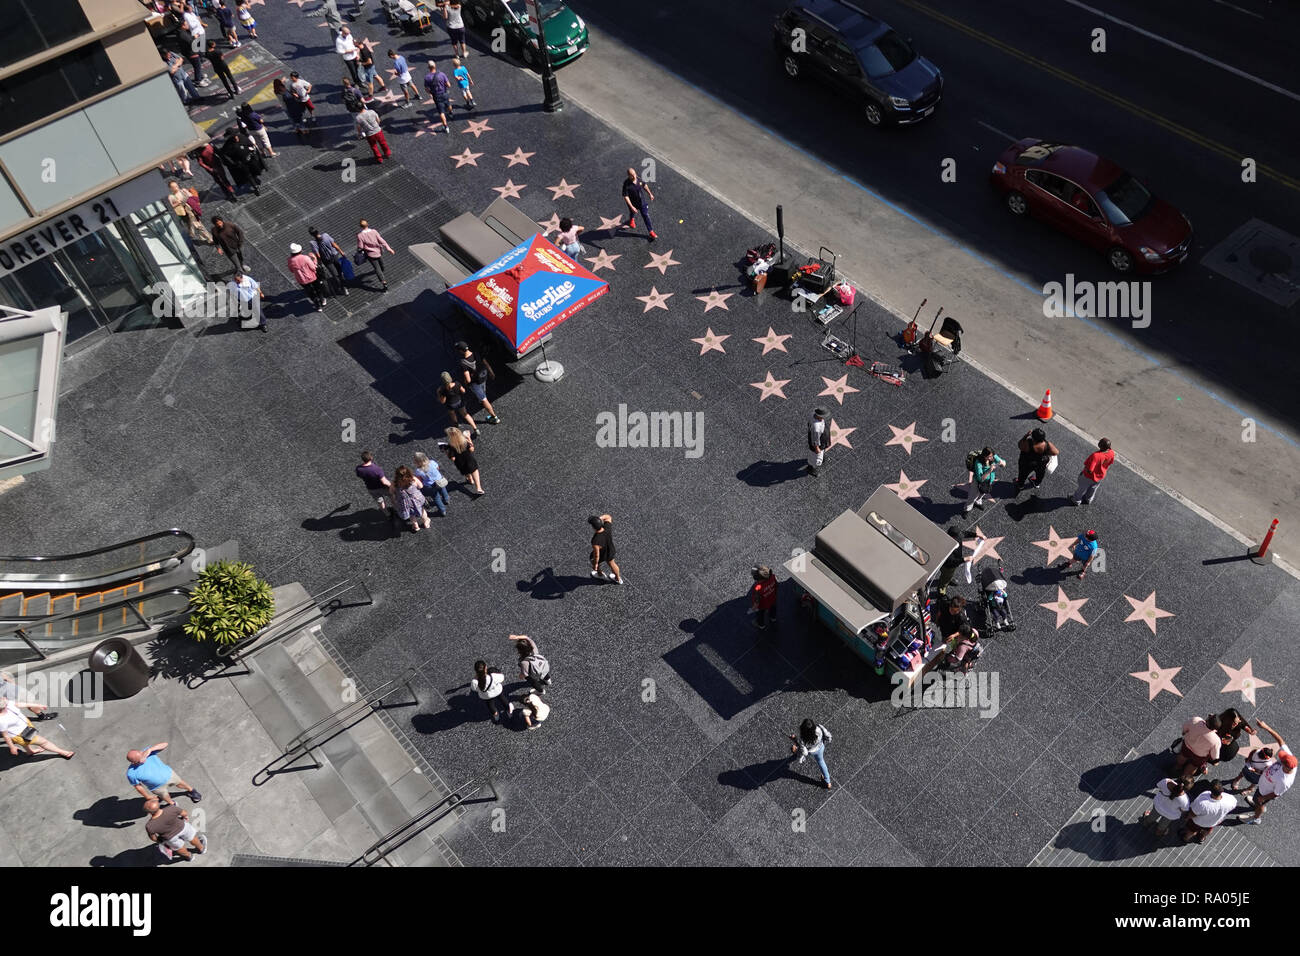 Los Angeles, CA / USA - Sept. 29, 2018: The Hollywood Walk of Fame at the Hollywood and Highland Center is shown in an elevated view during the day. Stock Photo